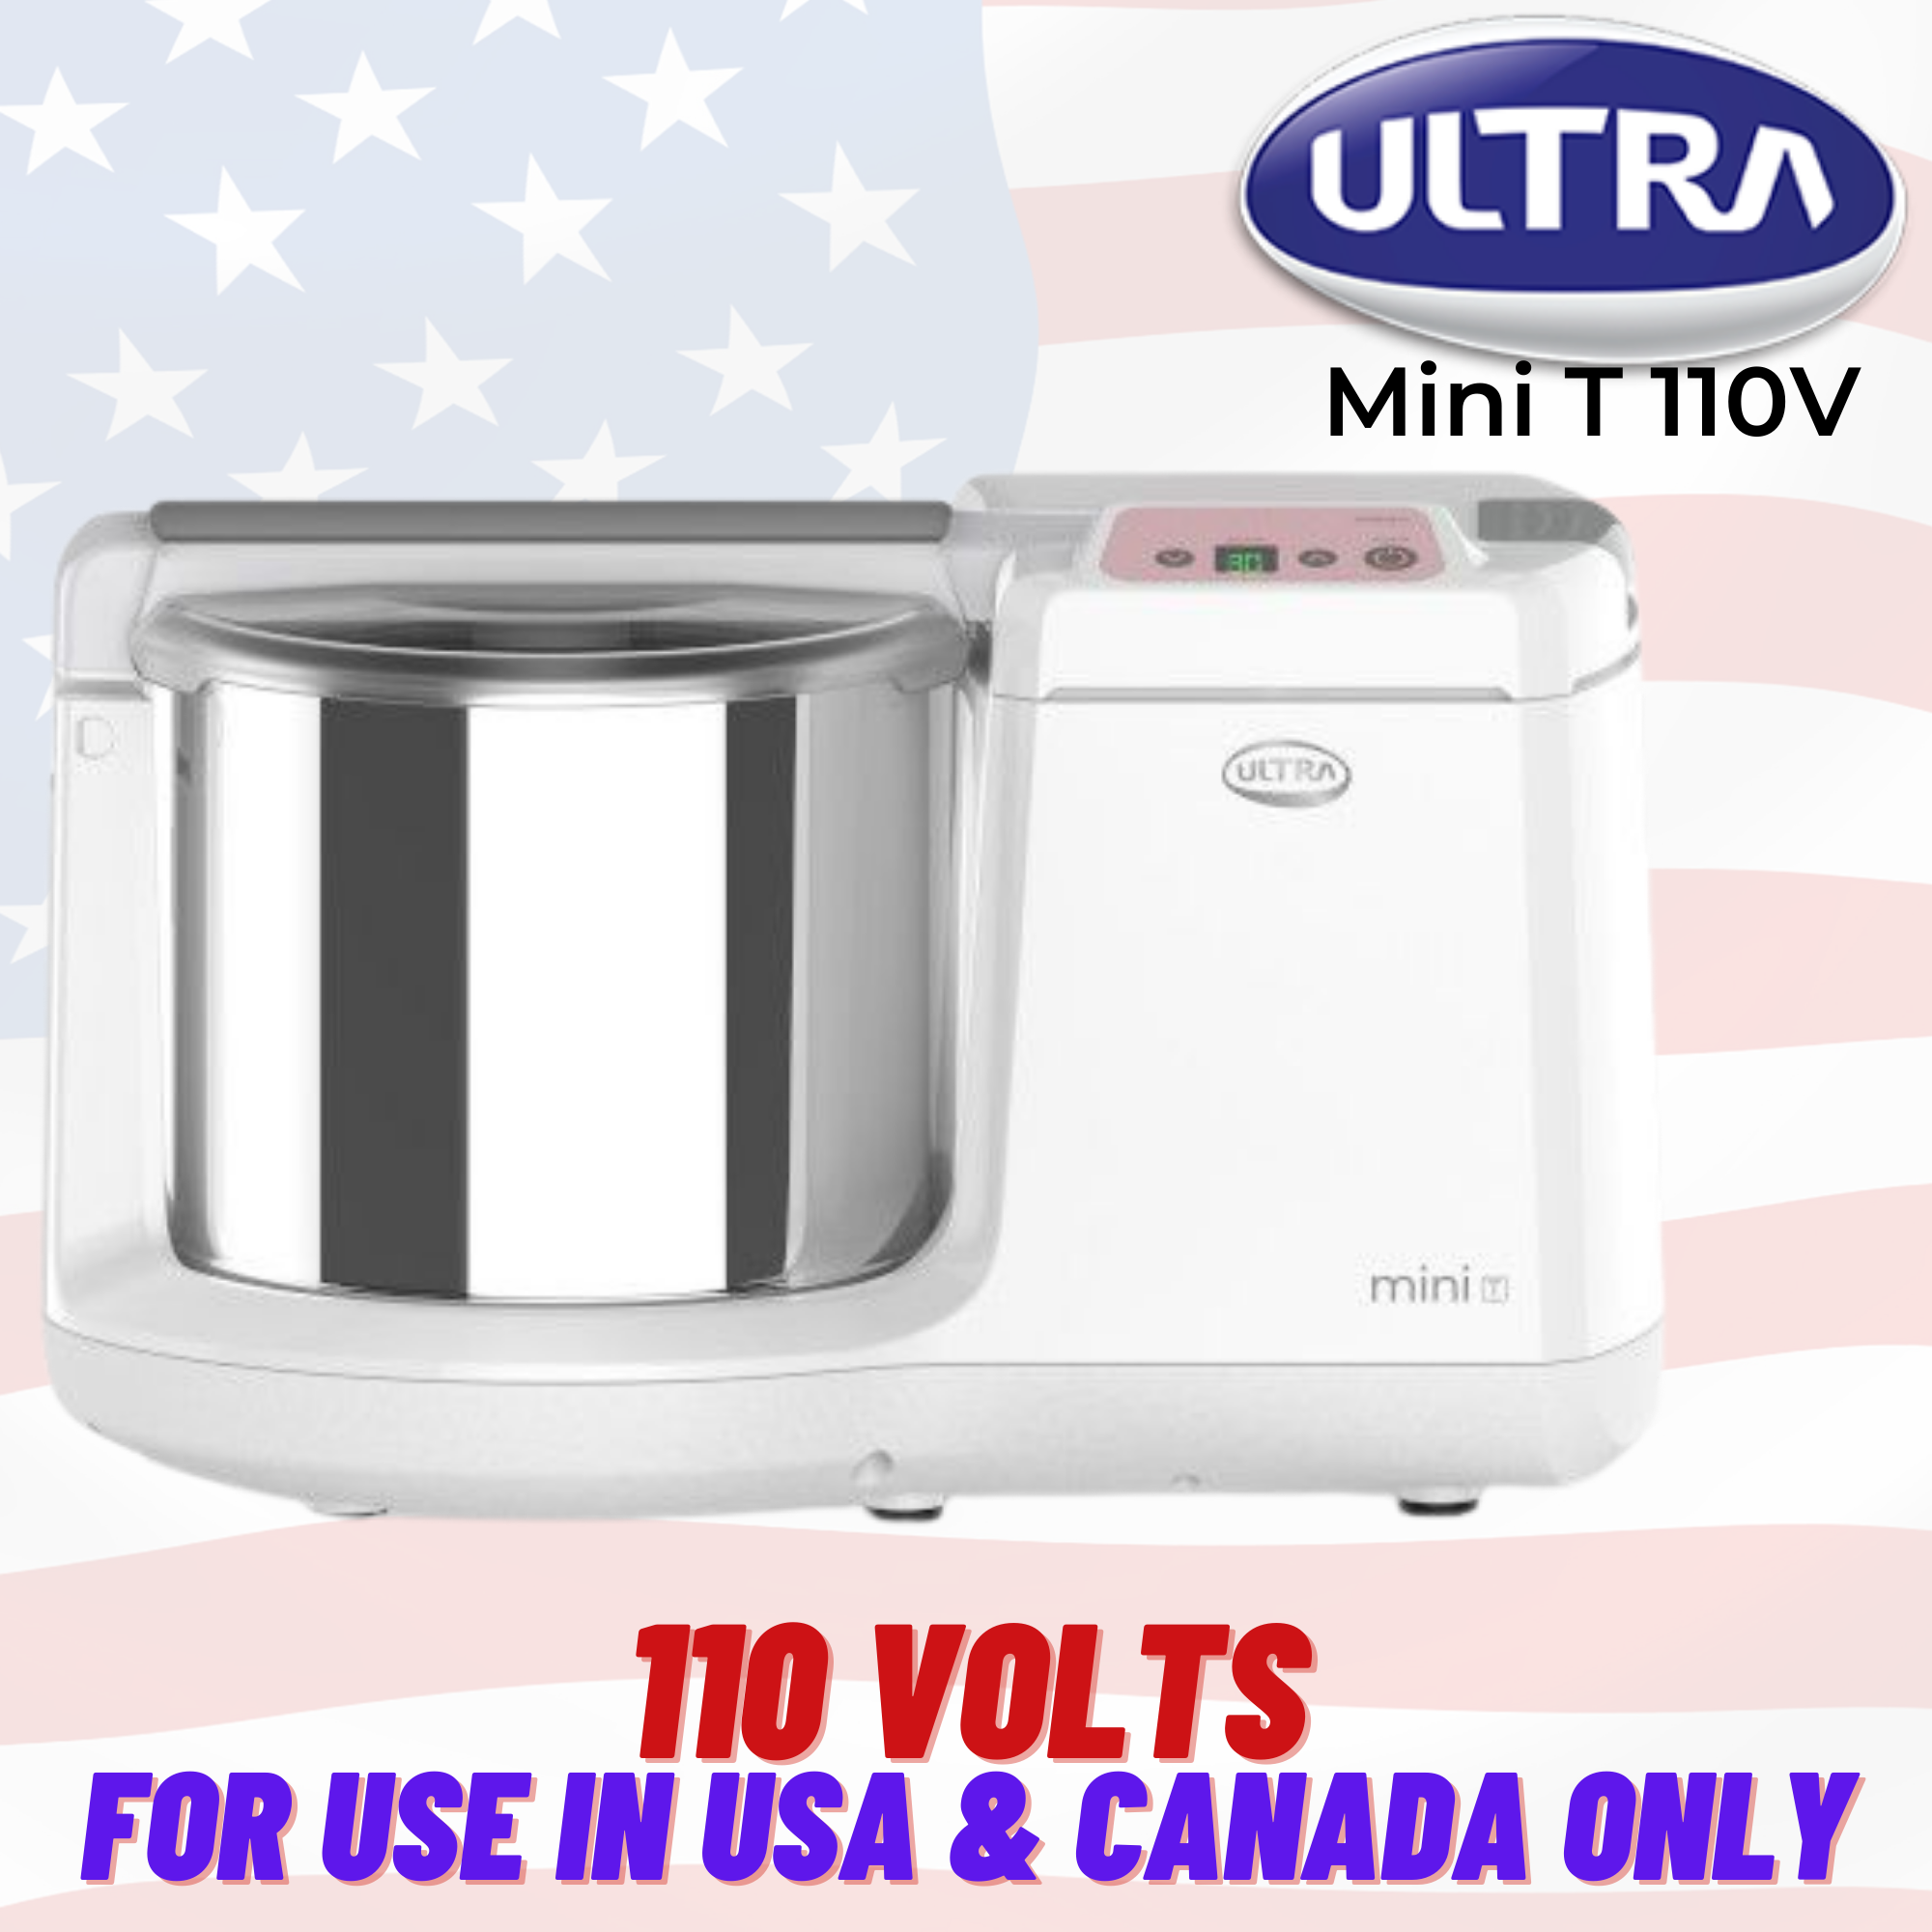 Elgi Ultra Wet Grinder Mini T with timer, 1.25 Litres, 110 Volts for use in USA & Canada only